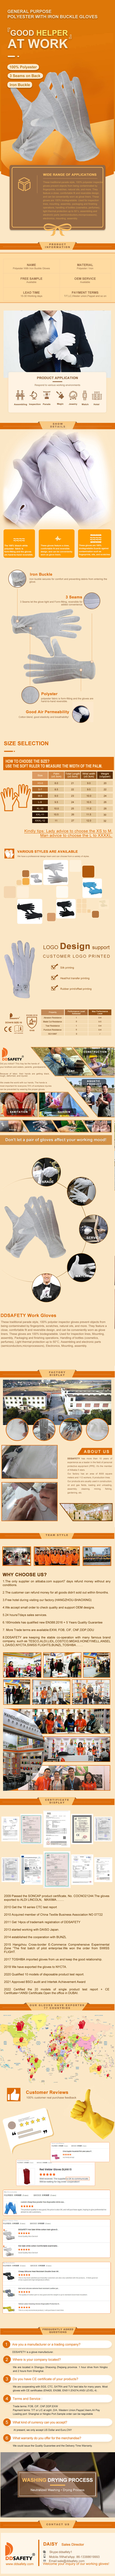 White Polyester Gloves, 3 Seams on Back, with a Iron Buckle - DCH416 White Polyester Gloves, 3 Seams on Back, with a Iron Buckle - DCH416 gloves,Polyester Gloves,White Polyester Gloves